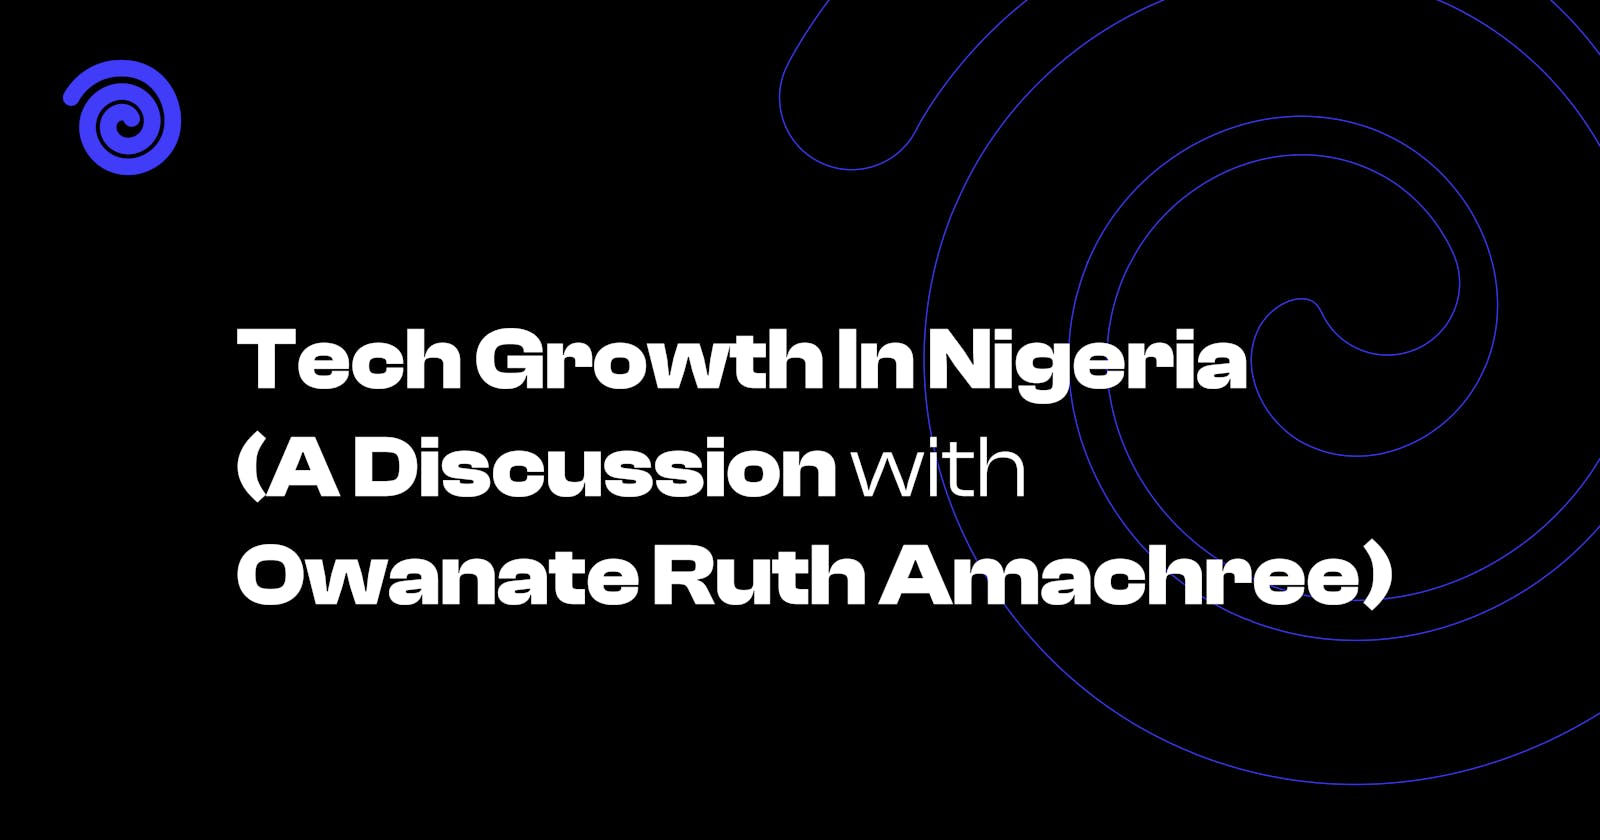 Tech Growth In Nigeria (A Discussion).